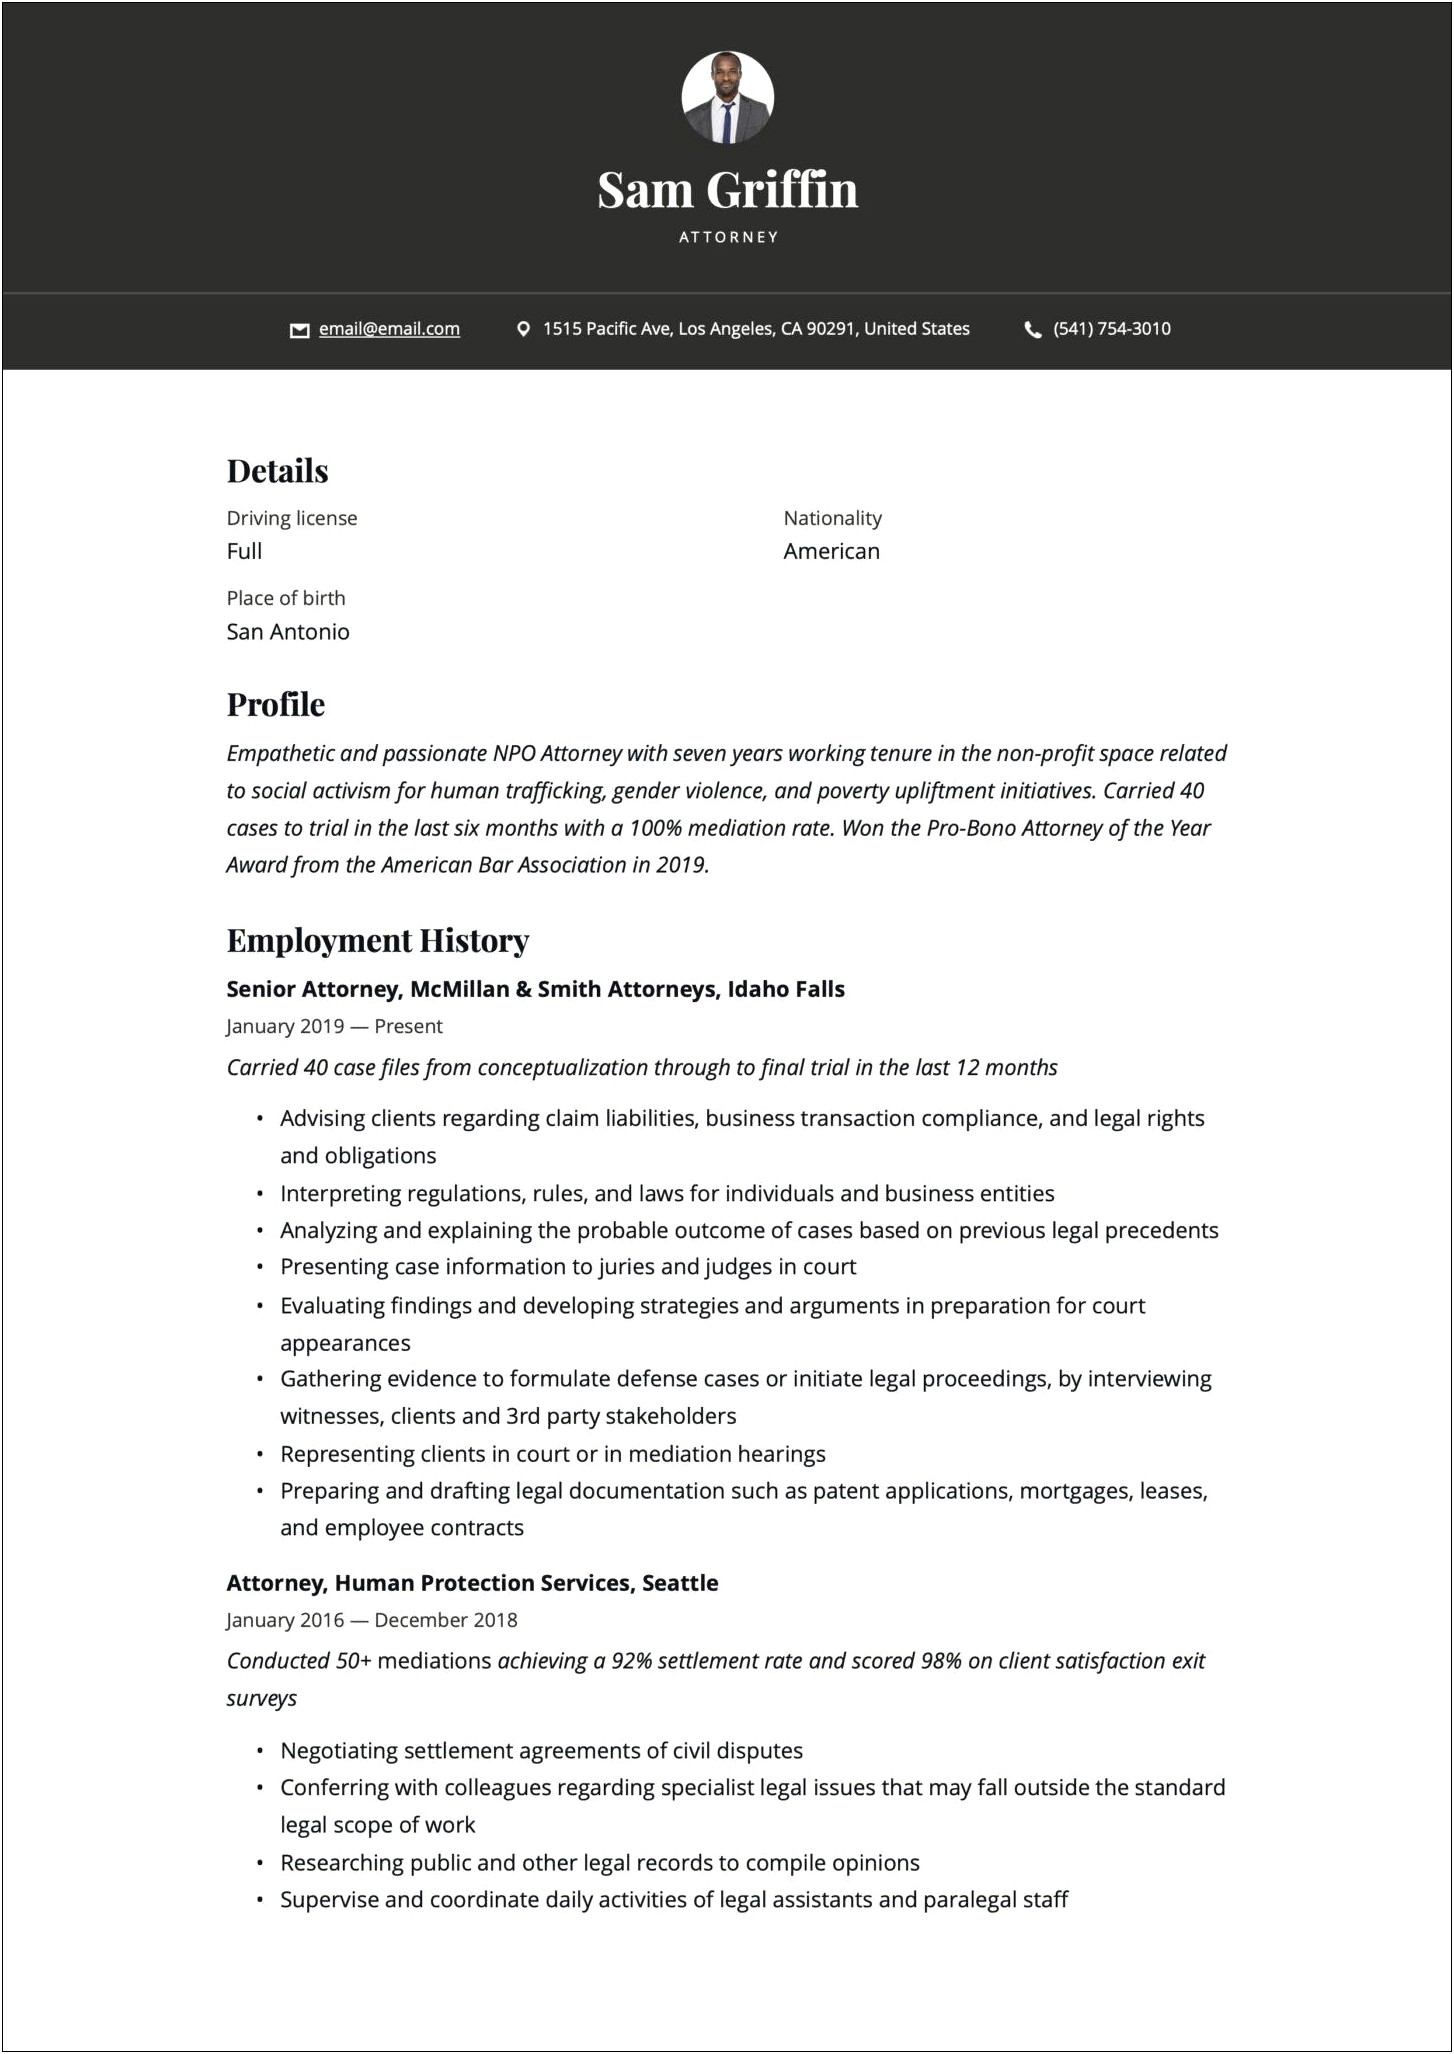 Lawyer Resume Summary Statement Samples